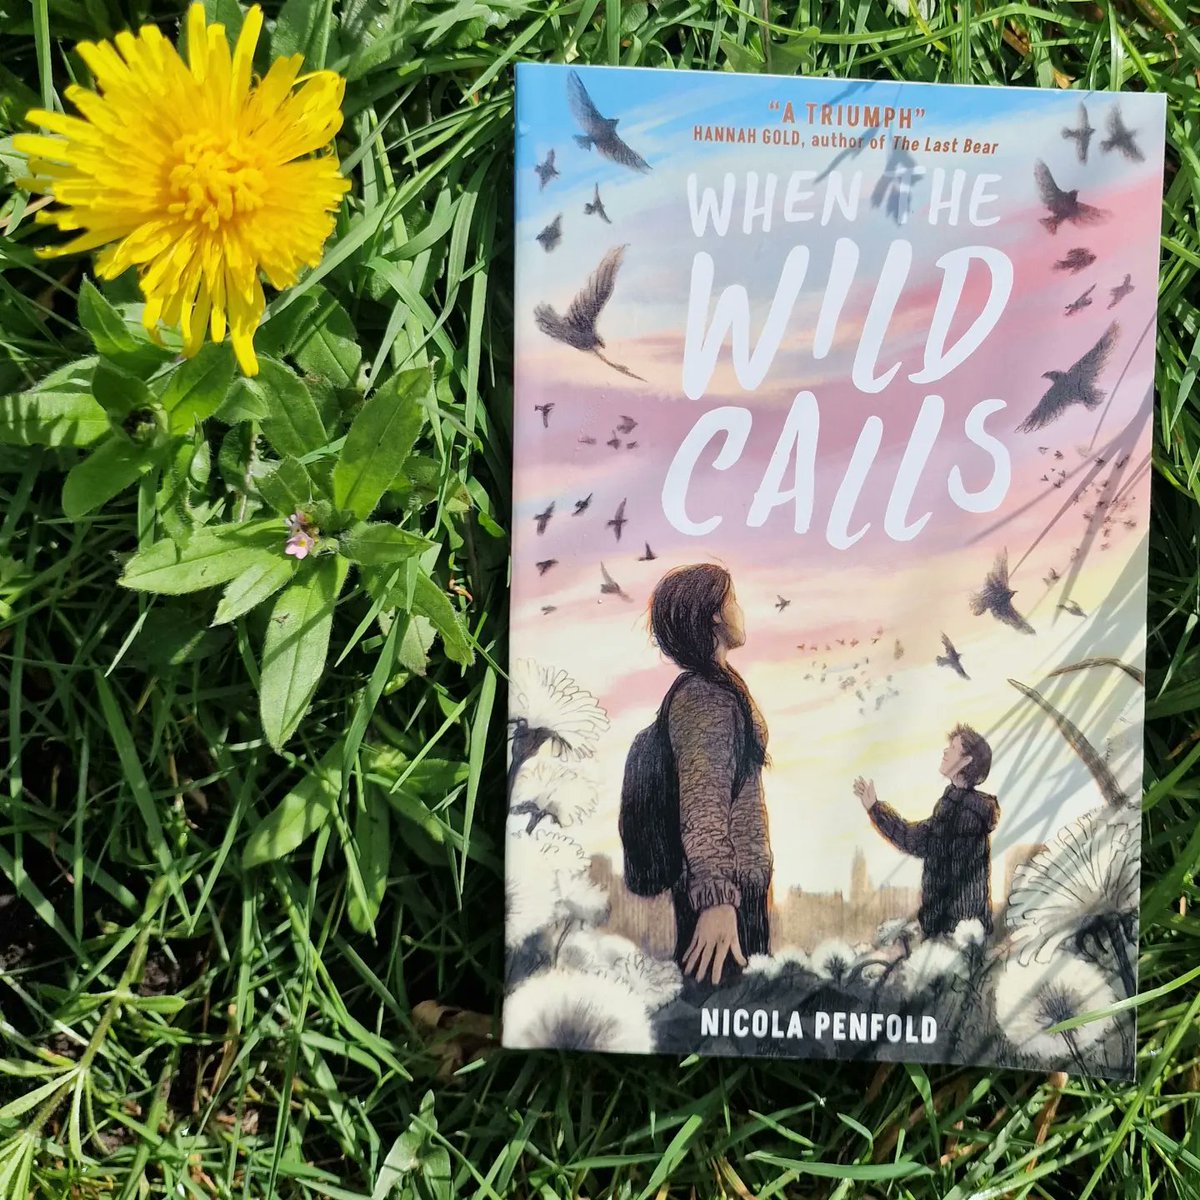 This is a plea for reviews, if anyone who's read When the Wild Calls has a couple of minutes to spare. Hate hate asking 🙈 but they make a big difference! ✨️😁